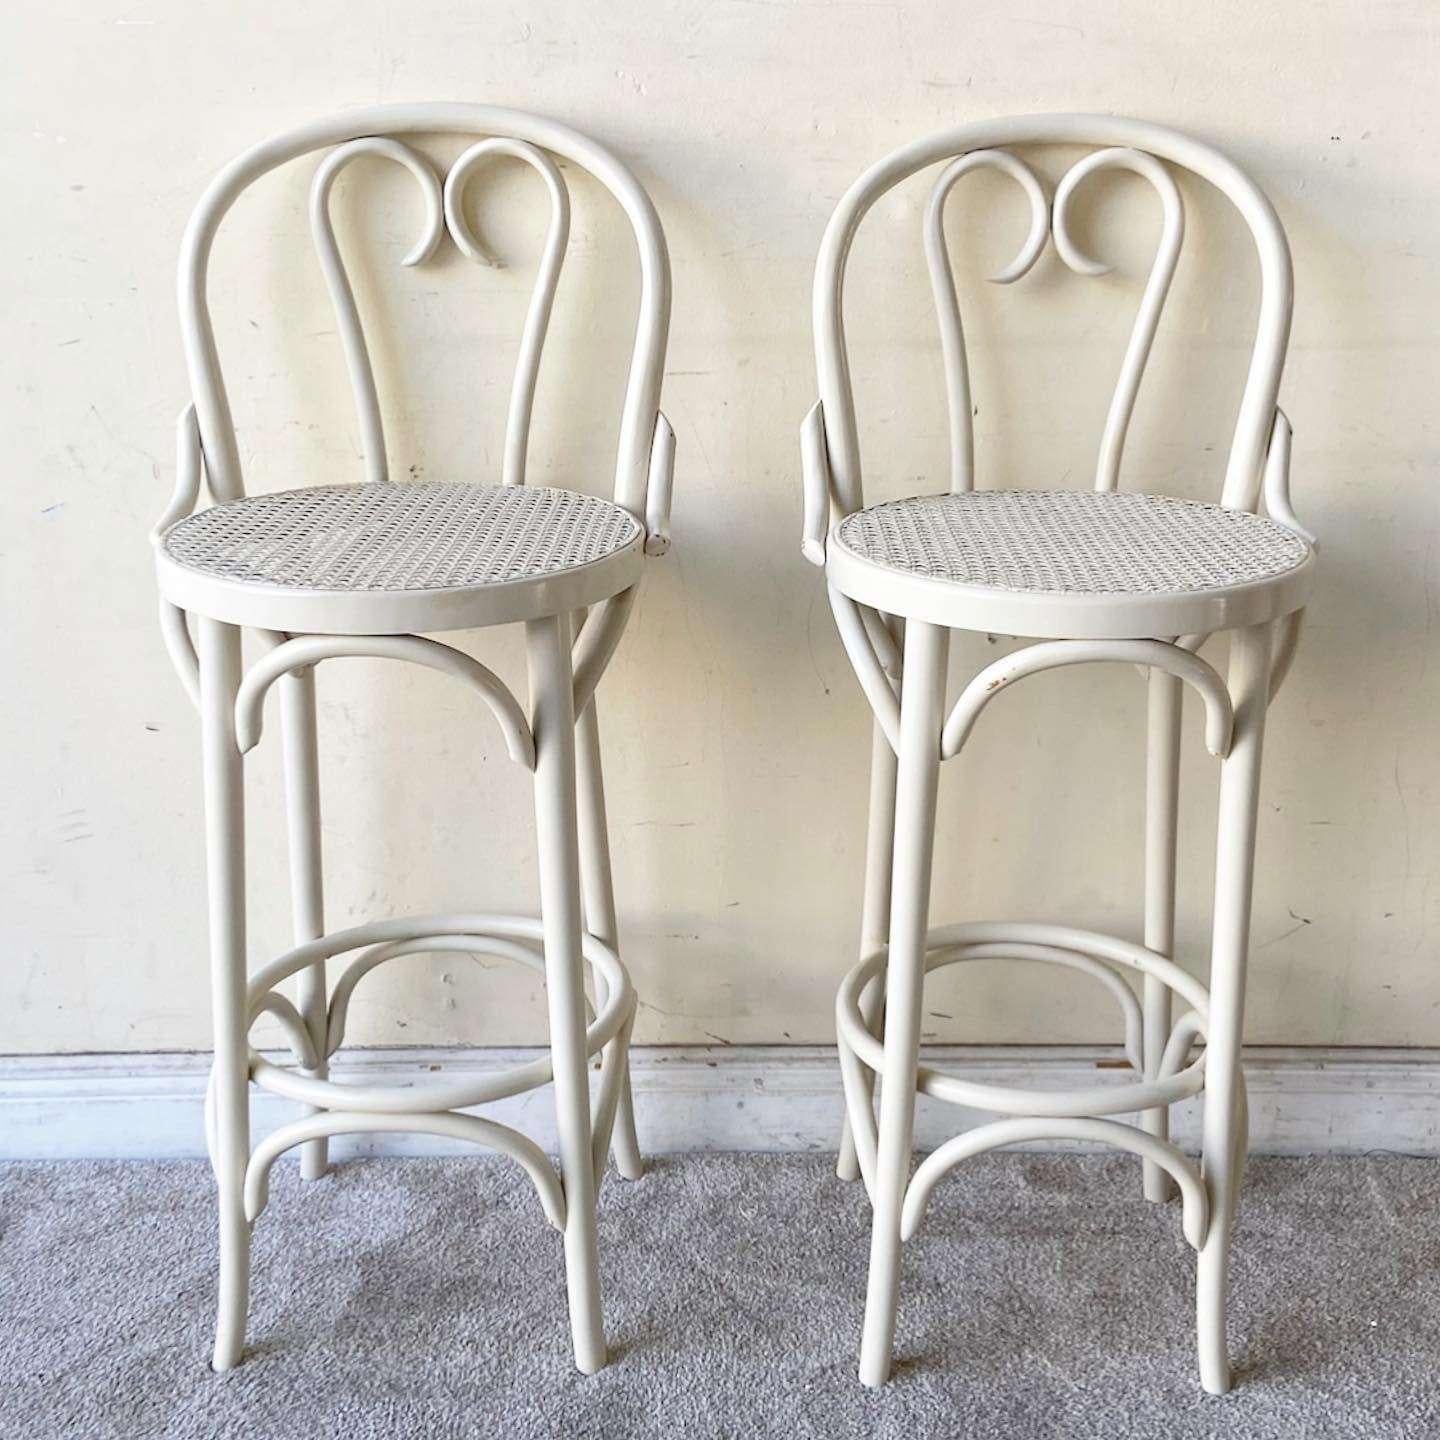 Amazing. Set of 4 vintage bohemian bent wood thonet stools. Each features a cane seat with an off white finish.

Seat height is 29.5 in